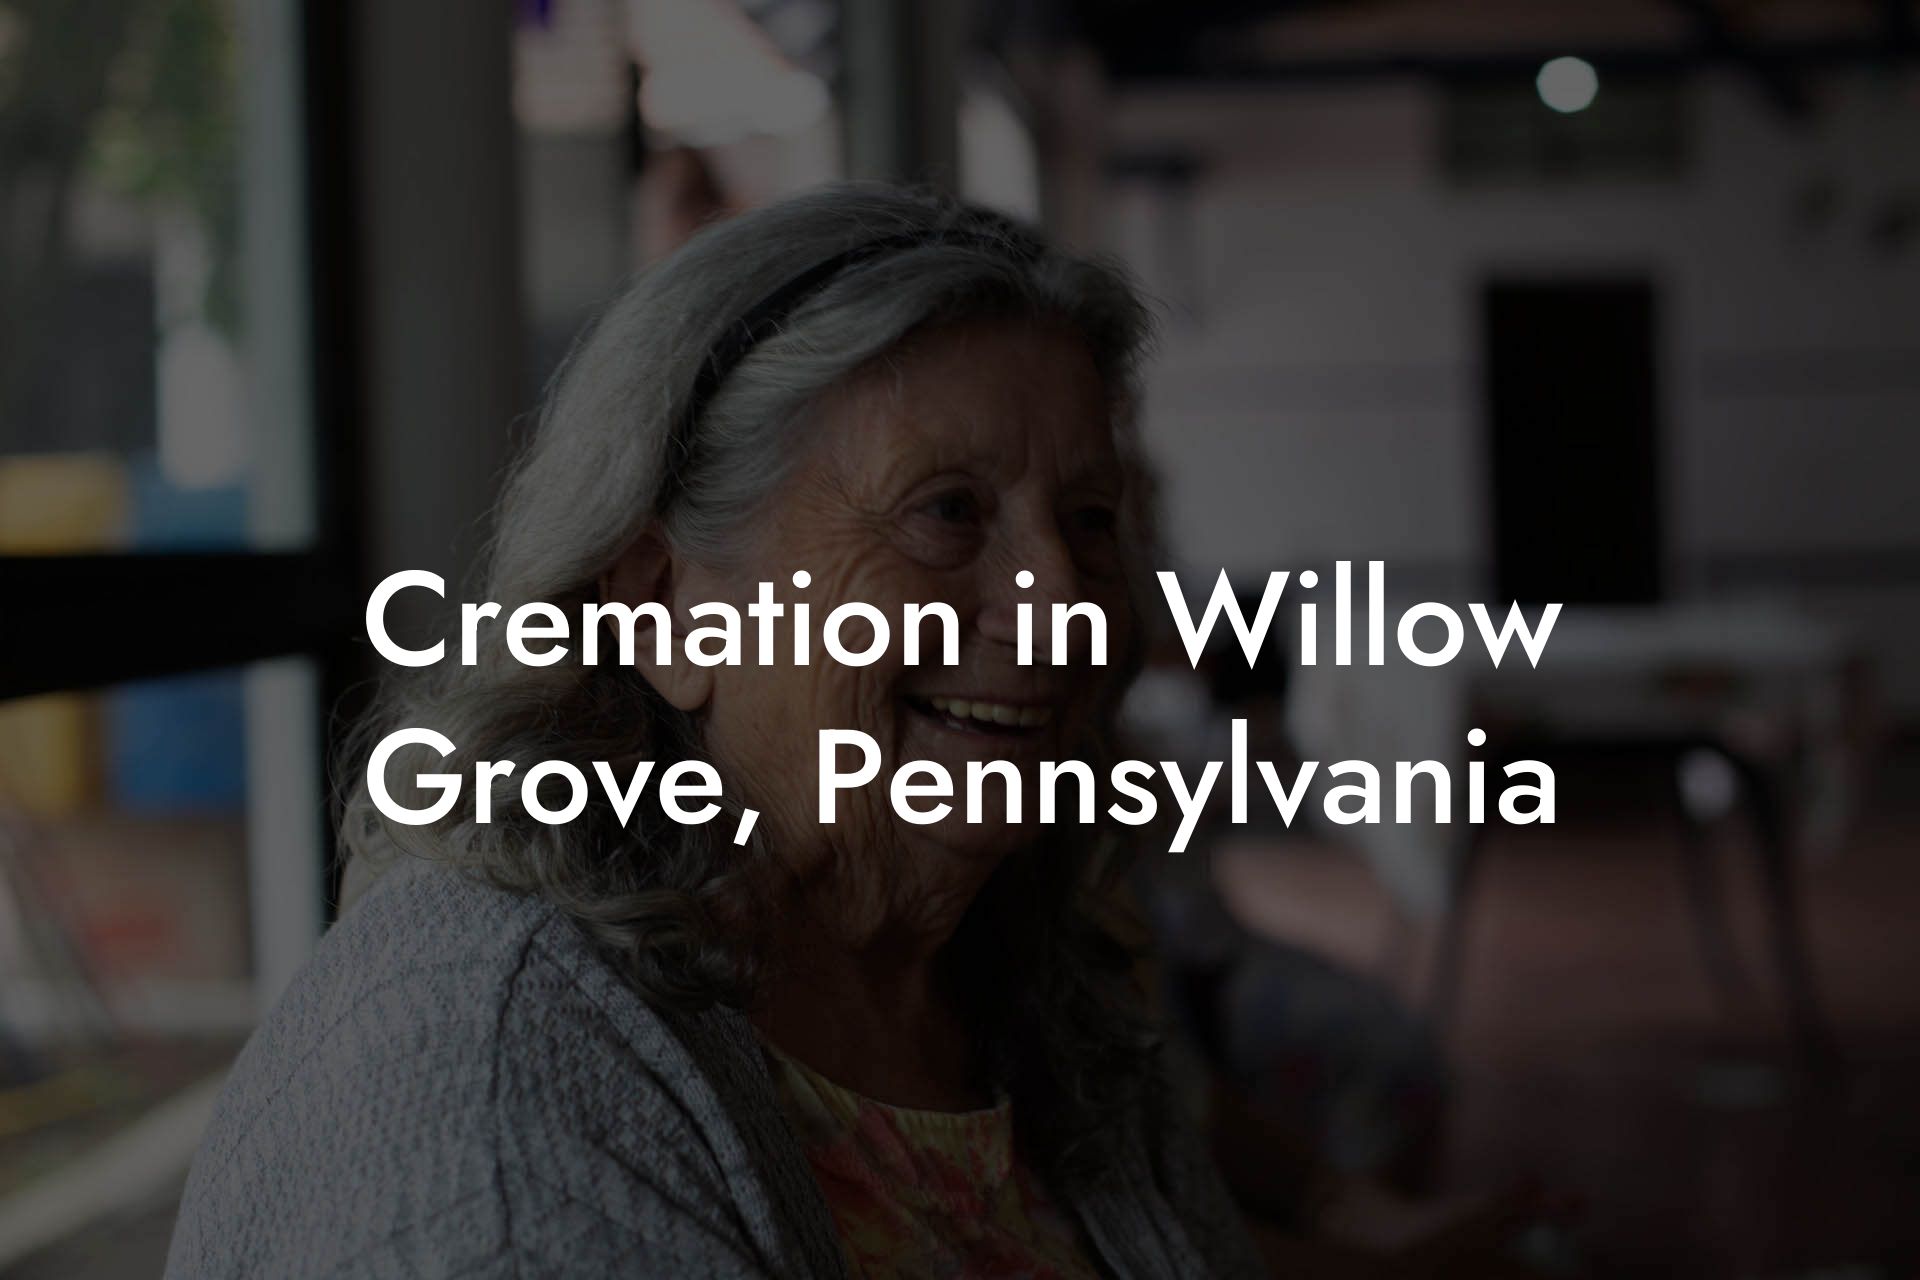 Cremation in Willow Grove, Pennsylvania